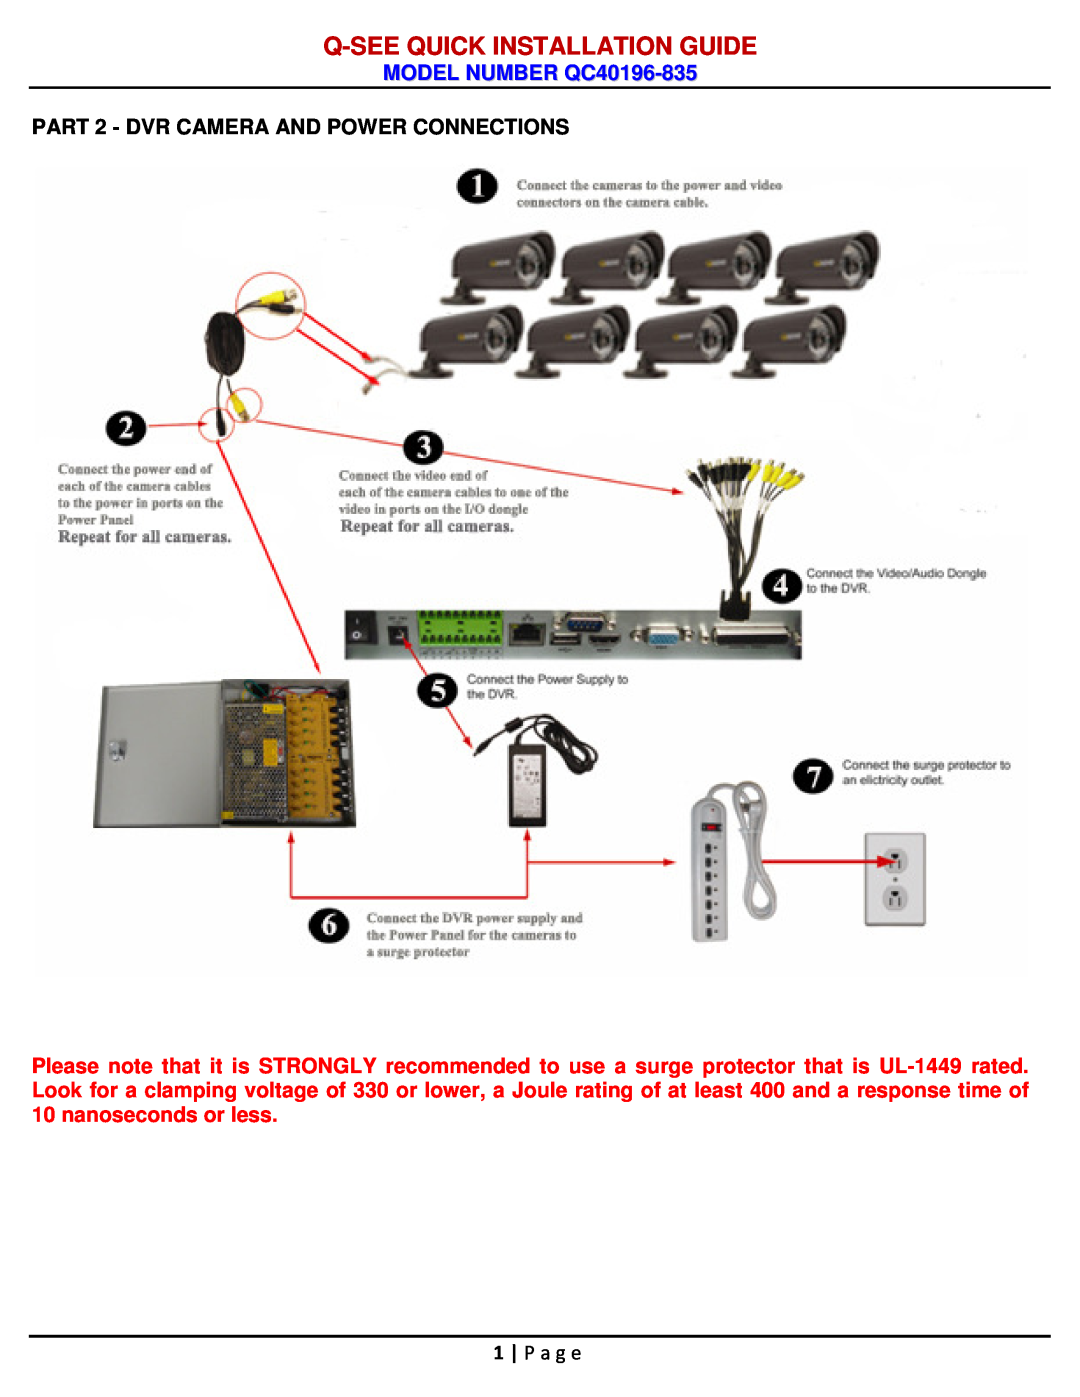 Q-See QC40196-833 manual PART 2 - DVR CAMERA AND POWER CONNECTIONS, Q-Seequick Installation Guide, MODEL NUMBER QC40196-835 